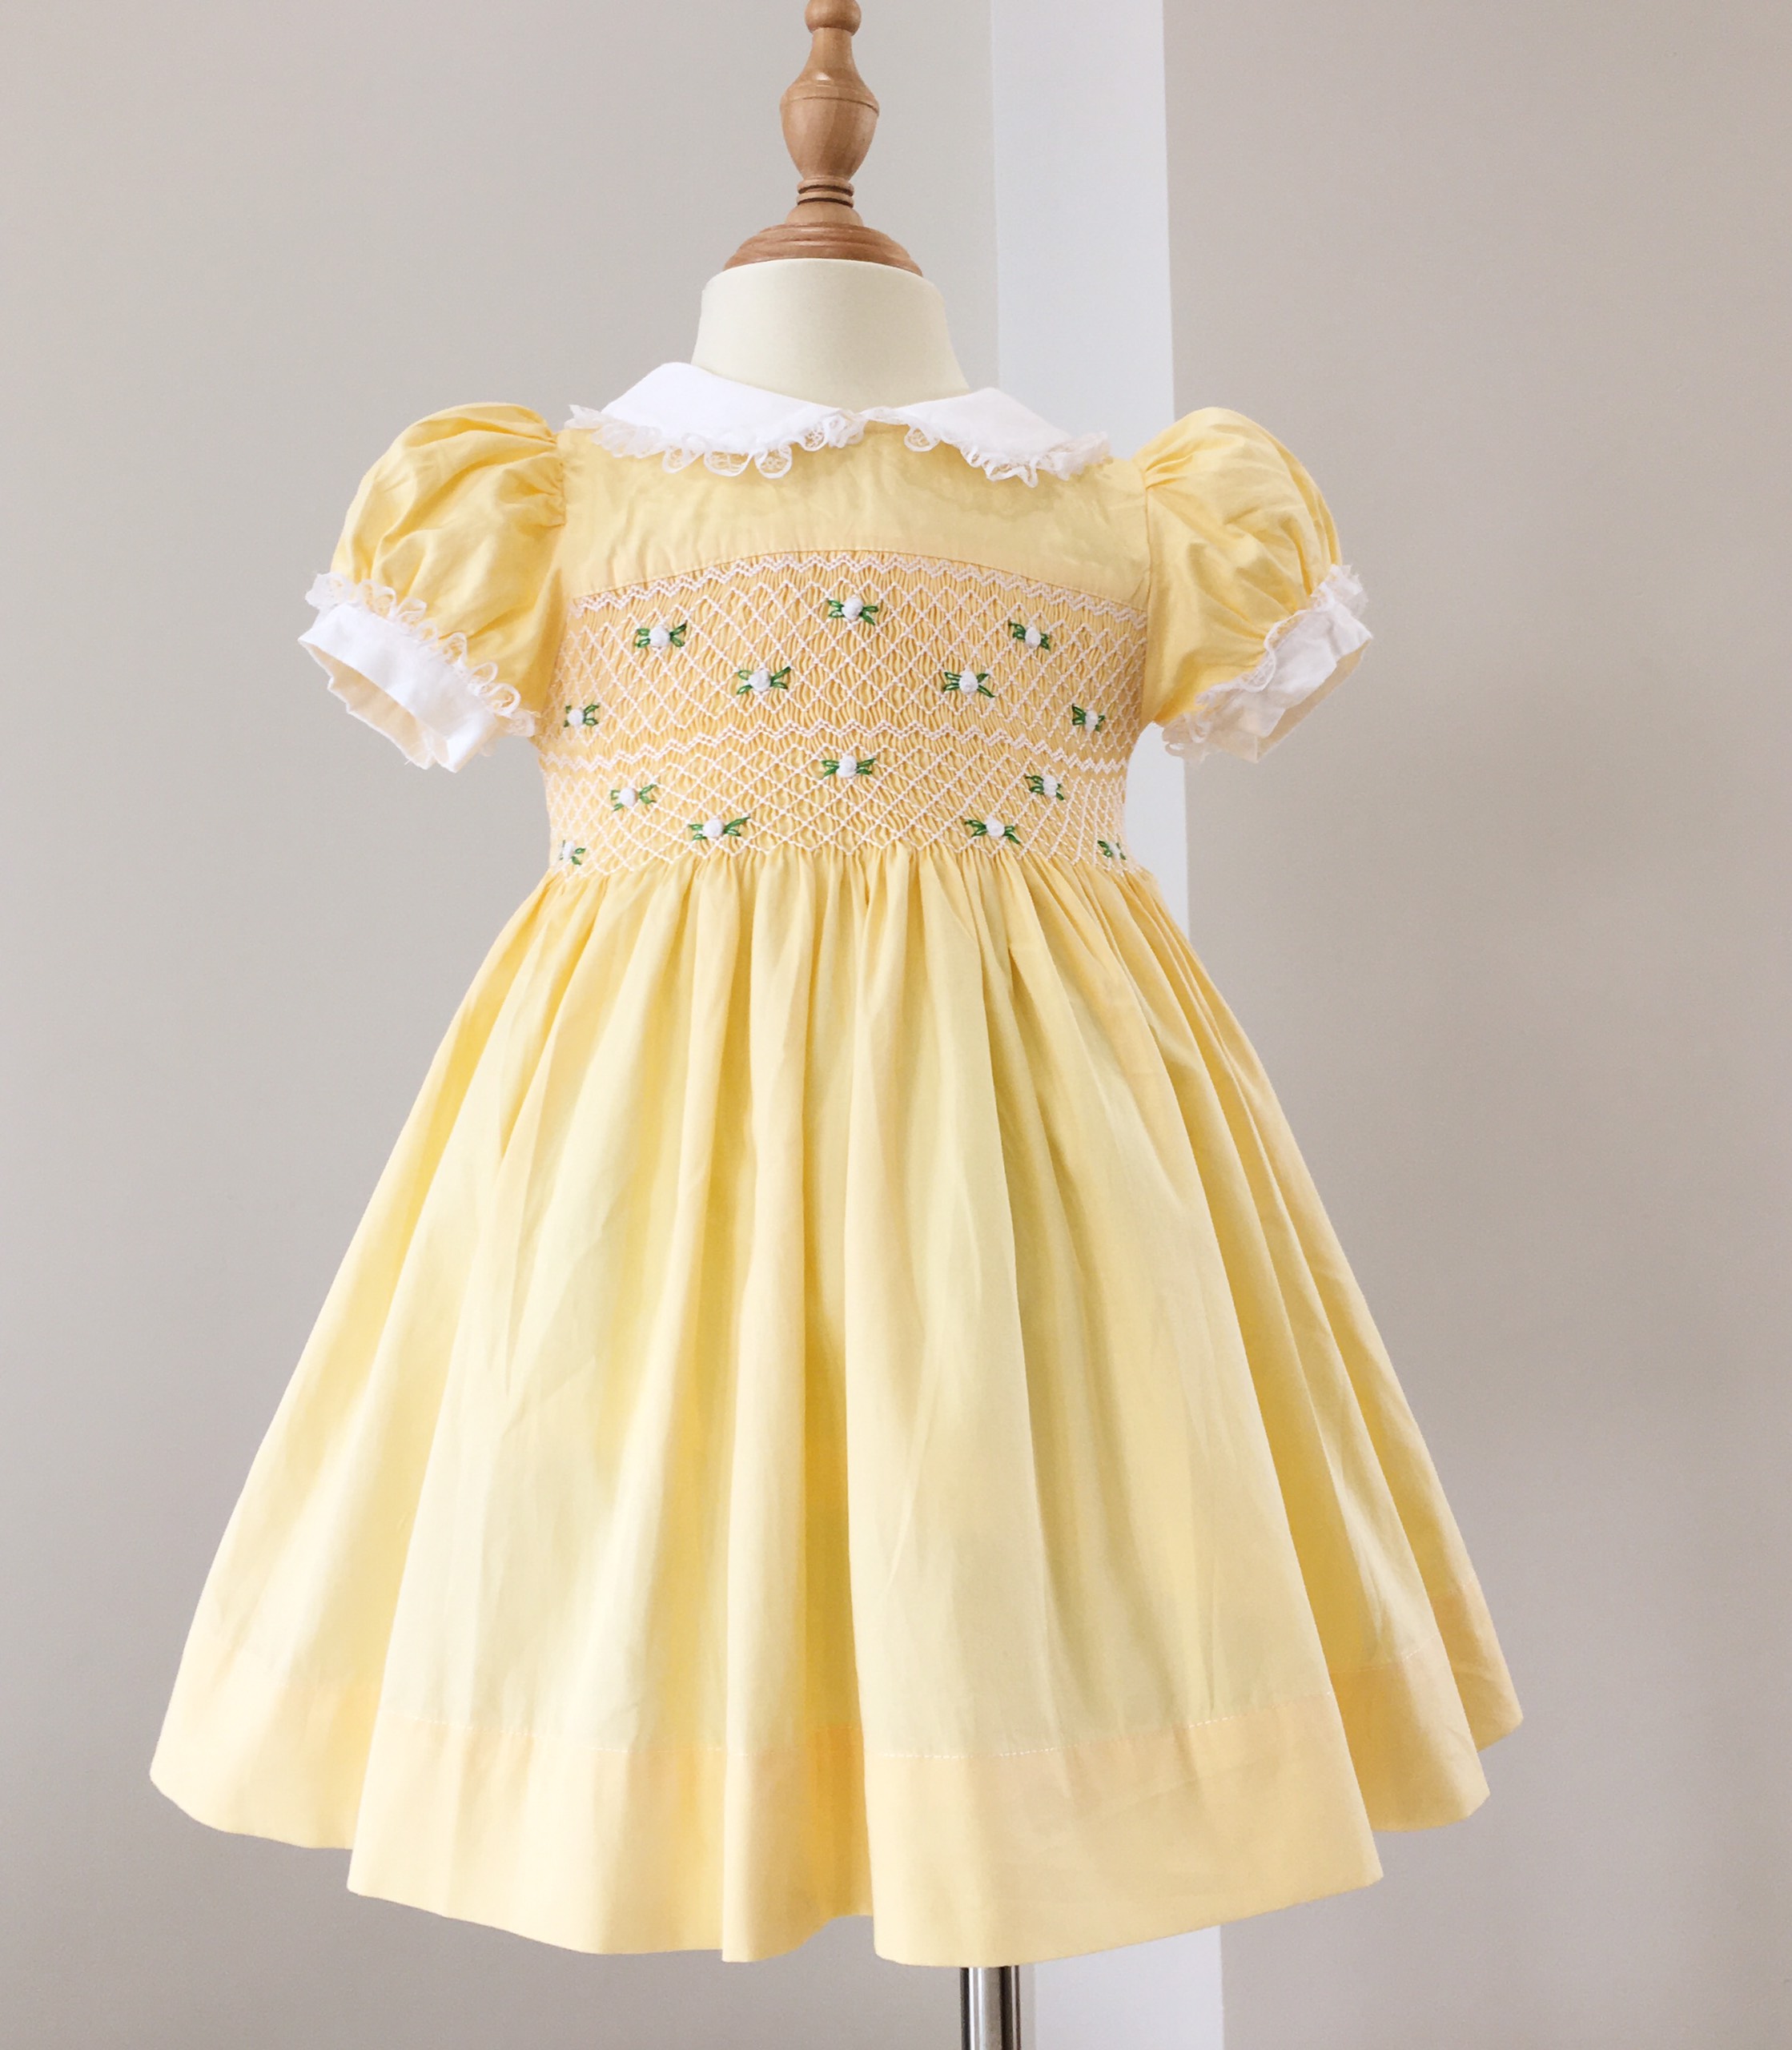 HANDMADE EMBROIDERY SMOCKED DRESS FOR CHILD GIRLS - Yellow (STYLE 3)